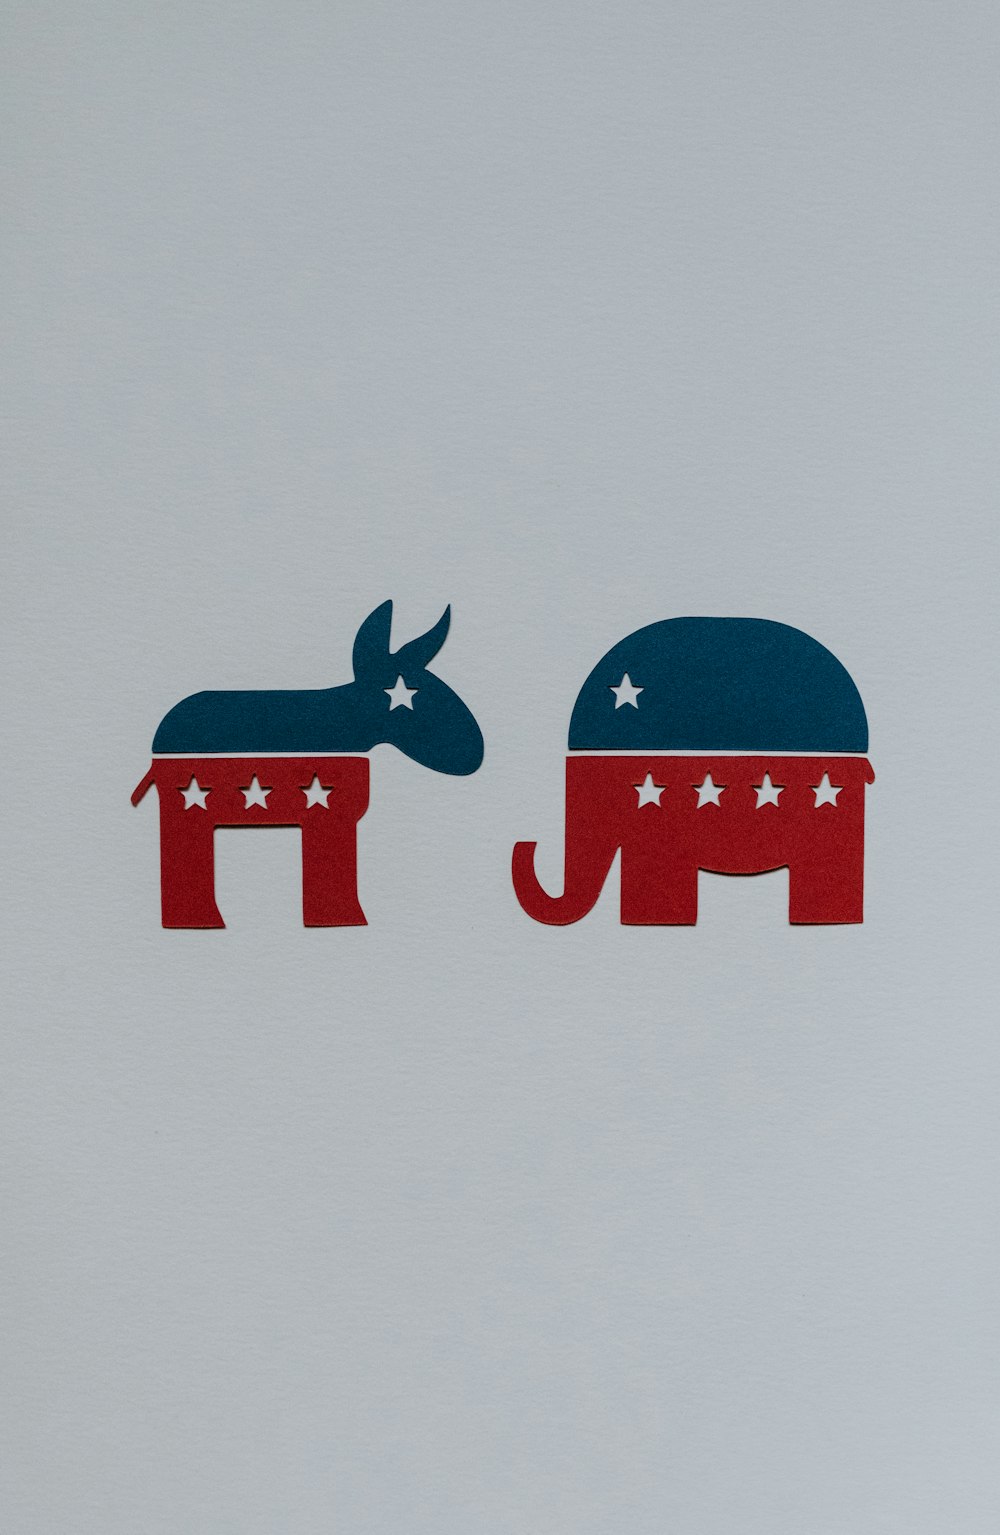 a picture of two elephants with stars on them